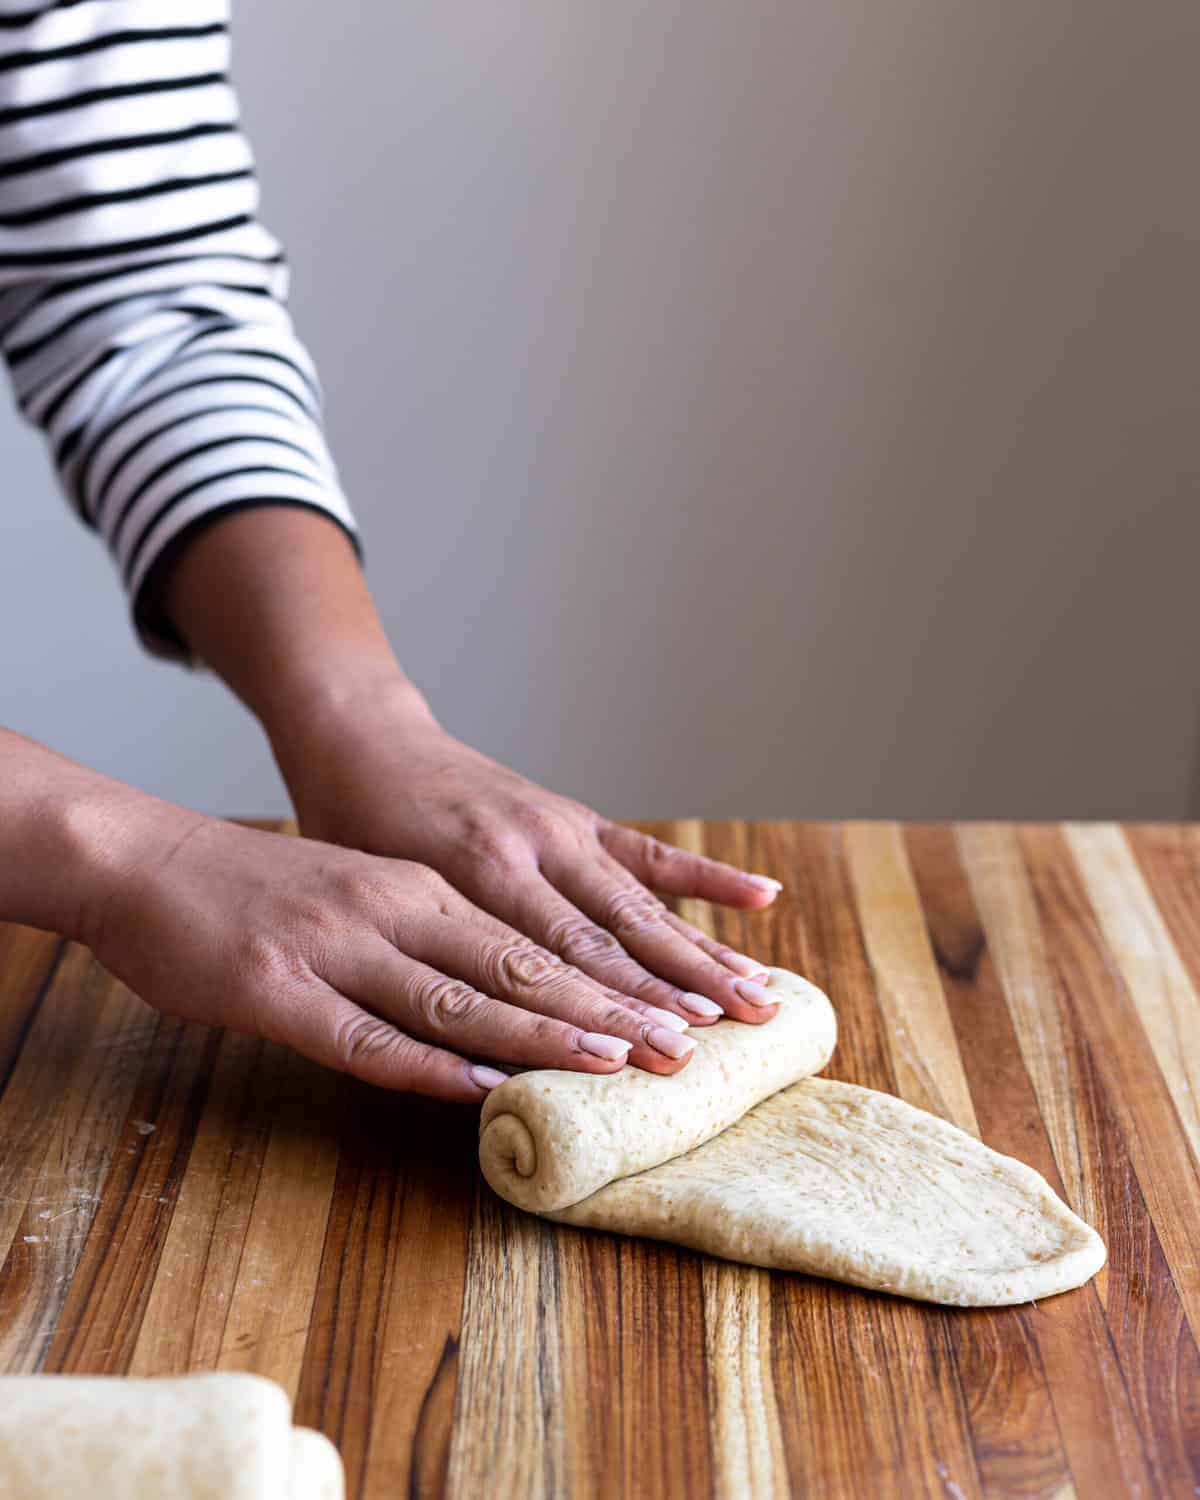 Hands rolling up portion of dough